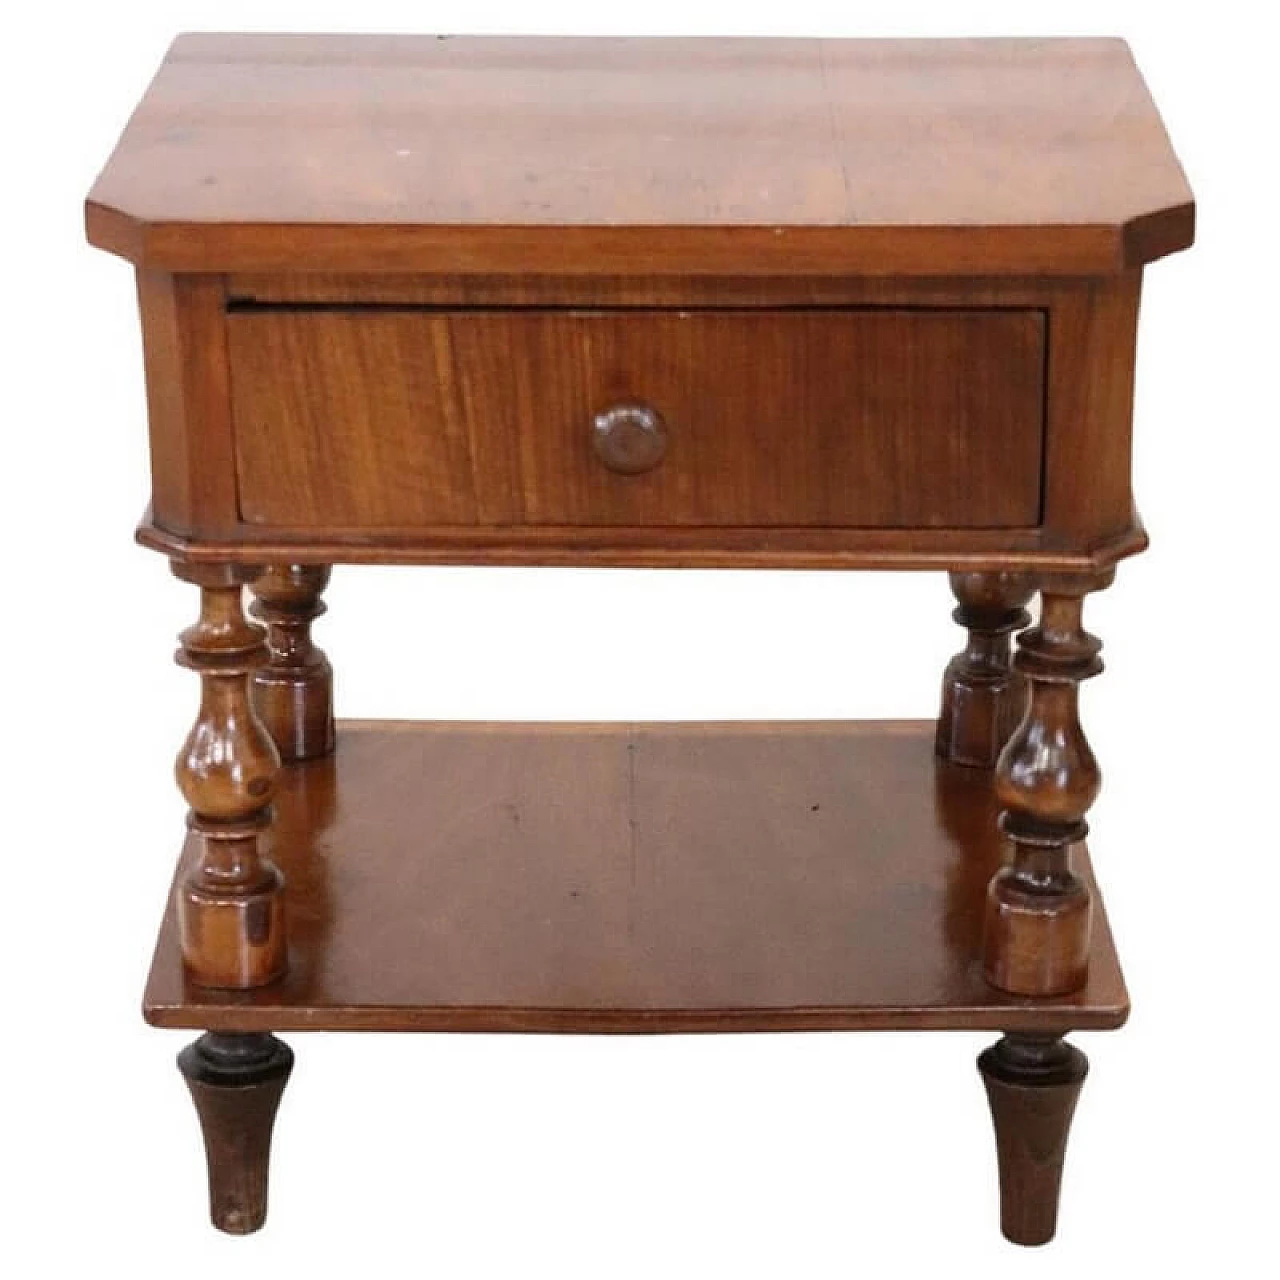 Walnut bedside table with turned legs, 19th century 1